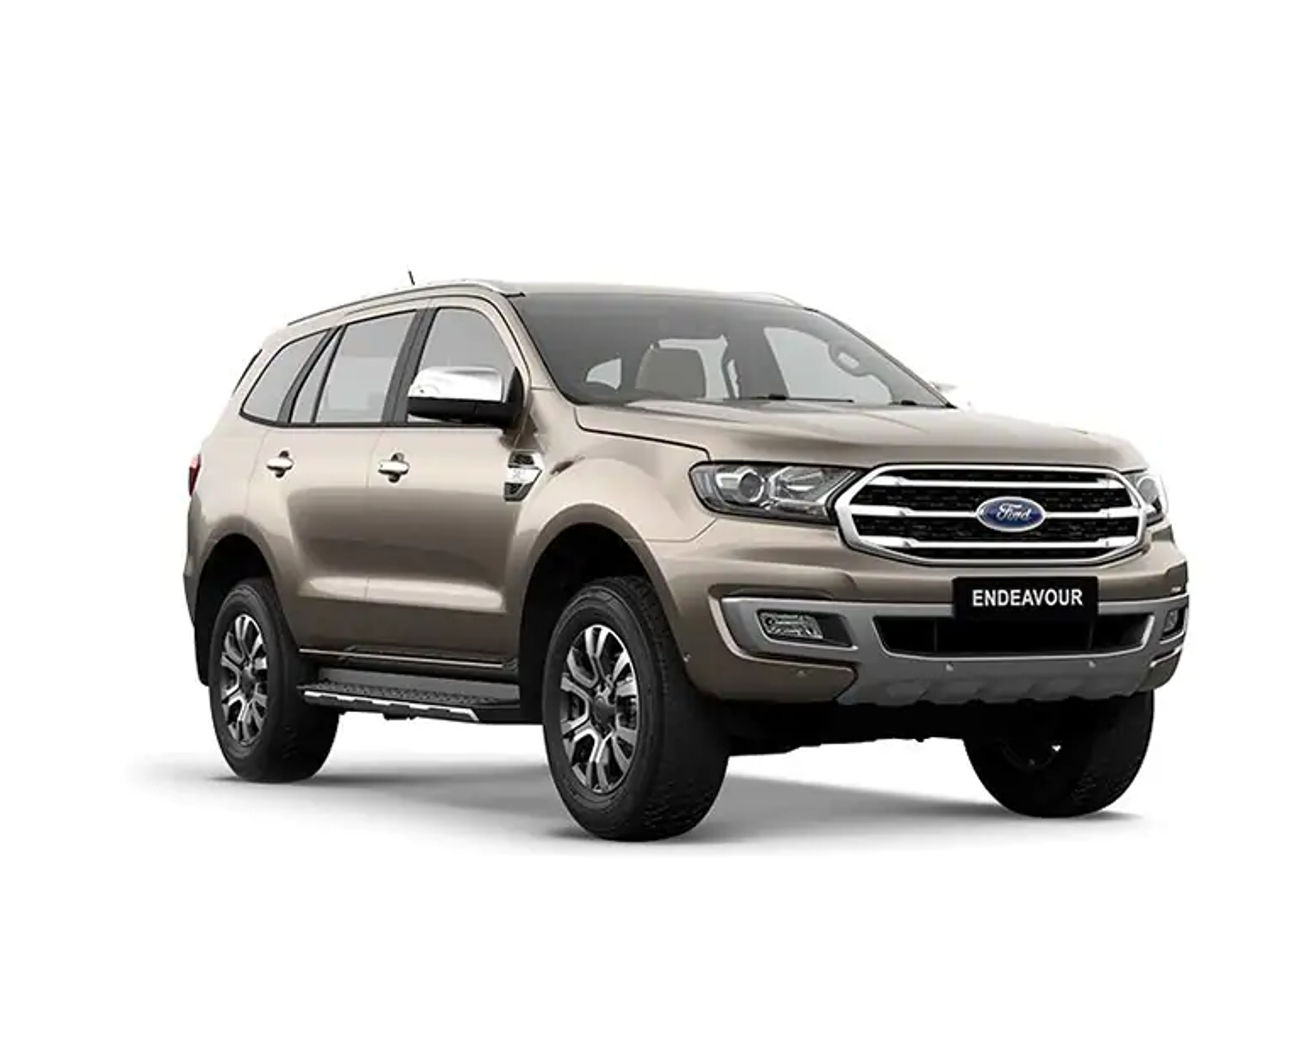 Ford Endeavour: Prices in New Delhi, Specs, Colors, Showrooms, FAQs,  Similar Cars